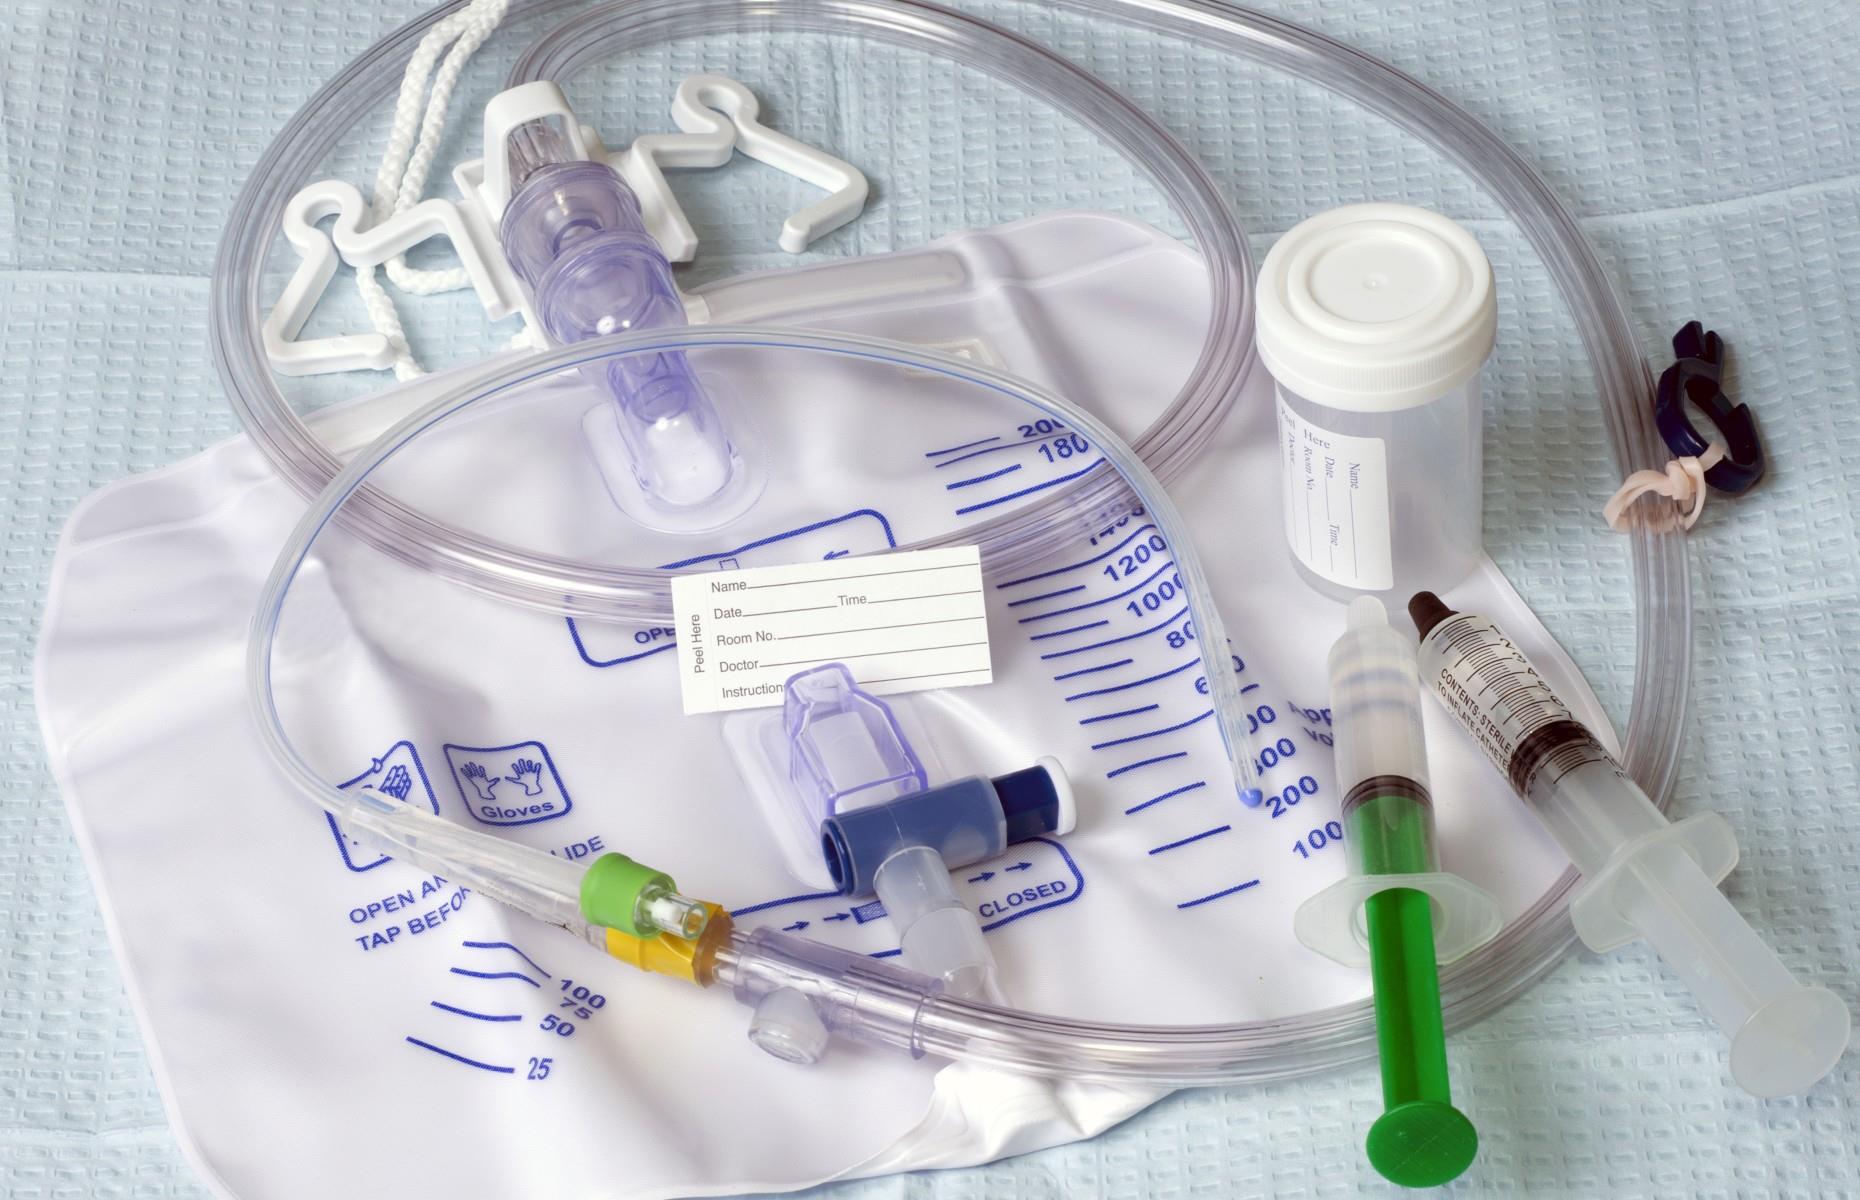 Needles, catheters and cannulae